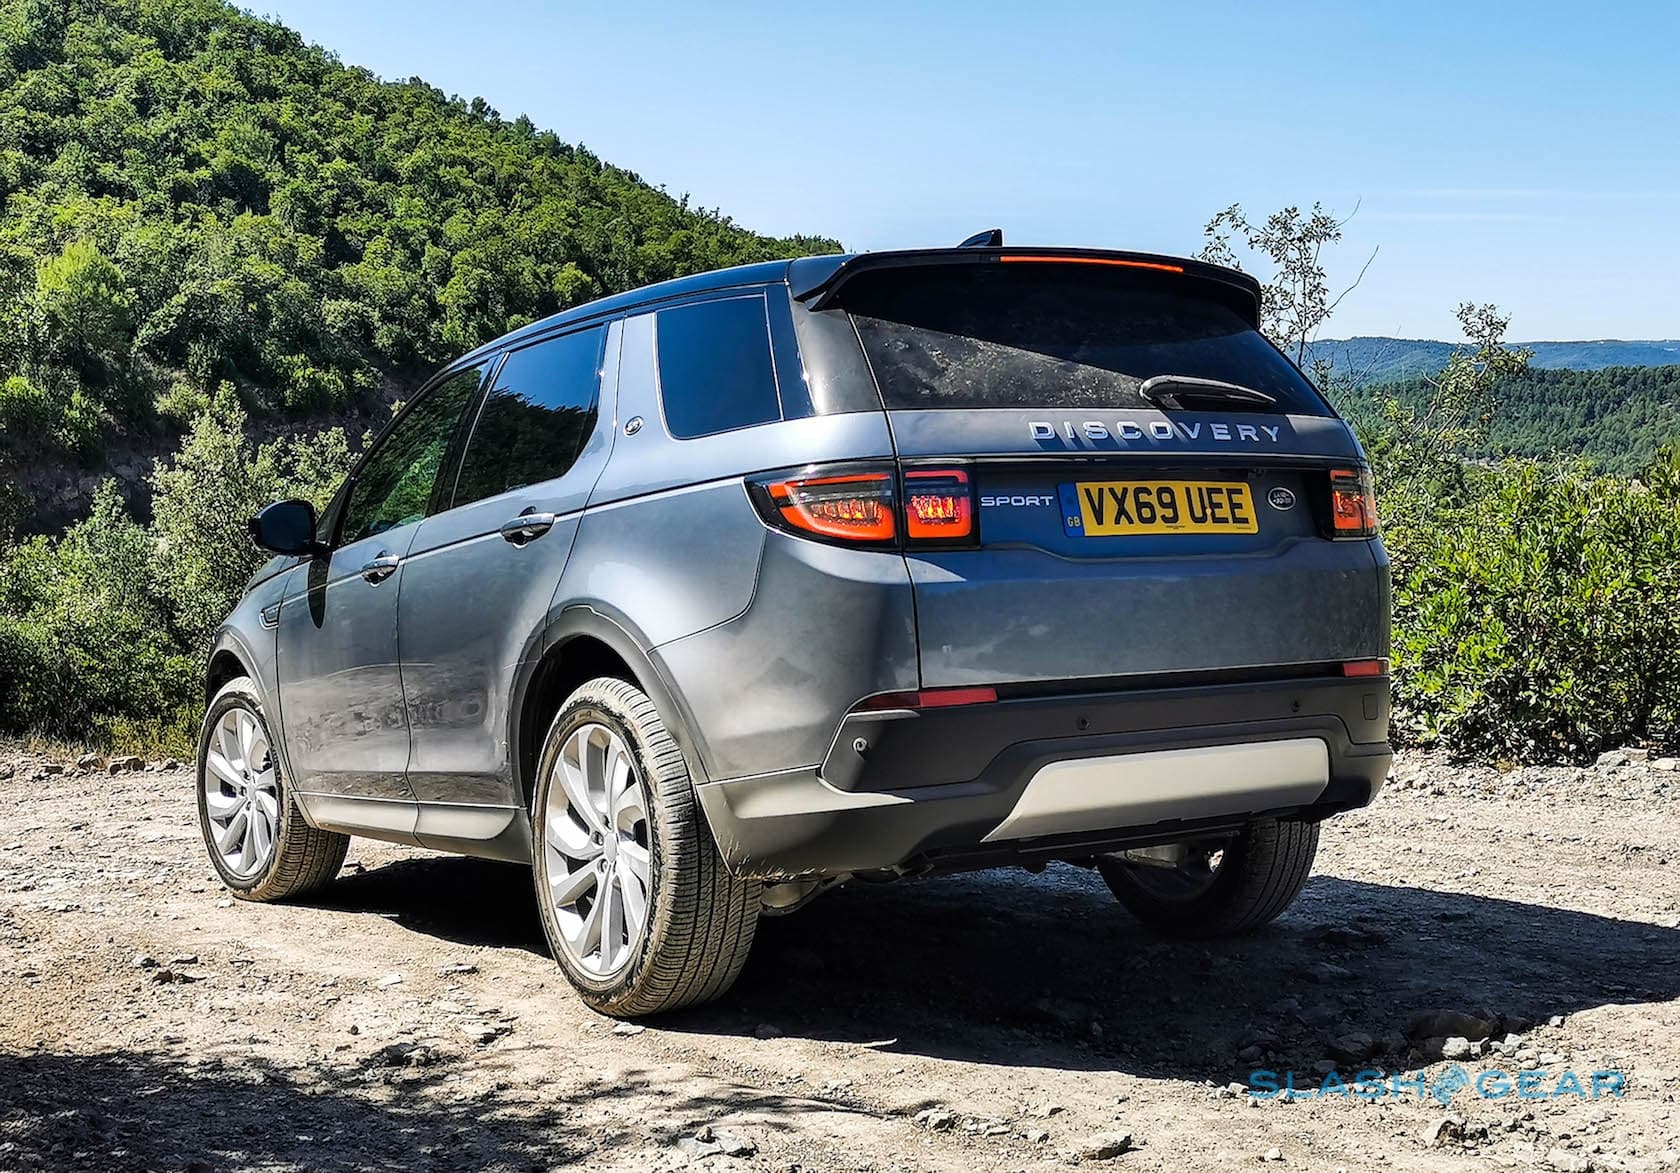 Range Rover Discovery New  - The Landmark Model Comes All Discovery Models Come Standard With Land Rover�s Incontrol Touch Pro Infotainment System.